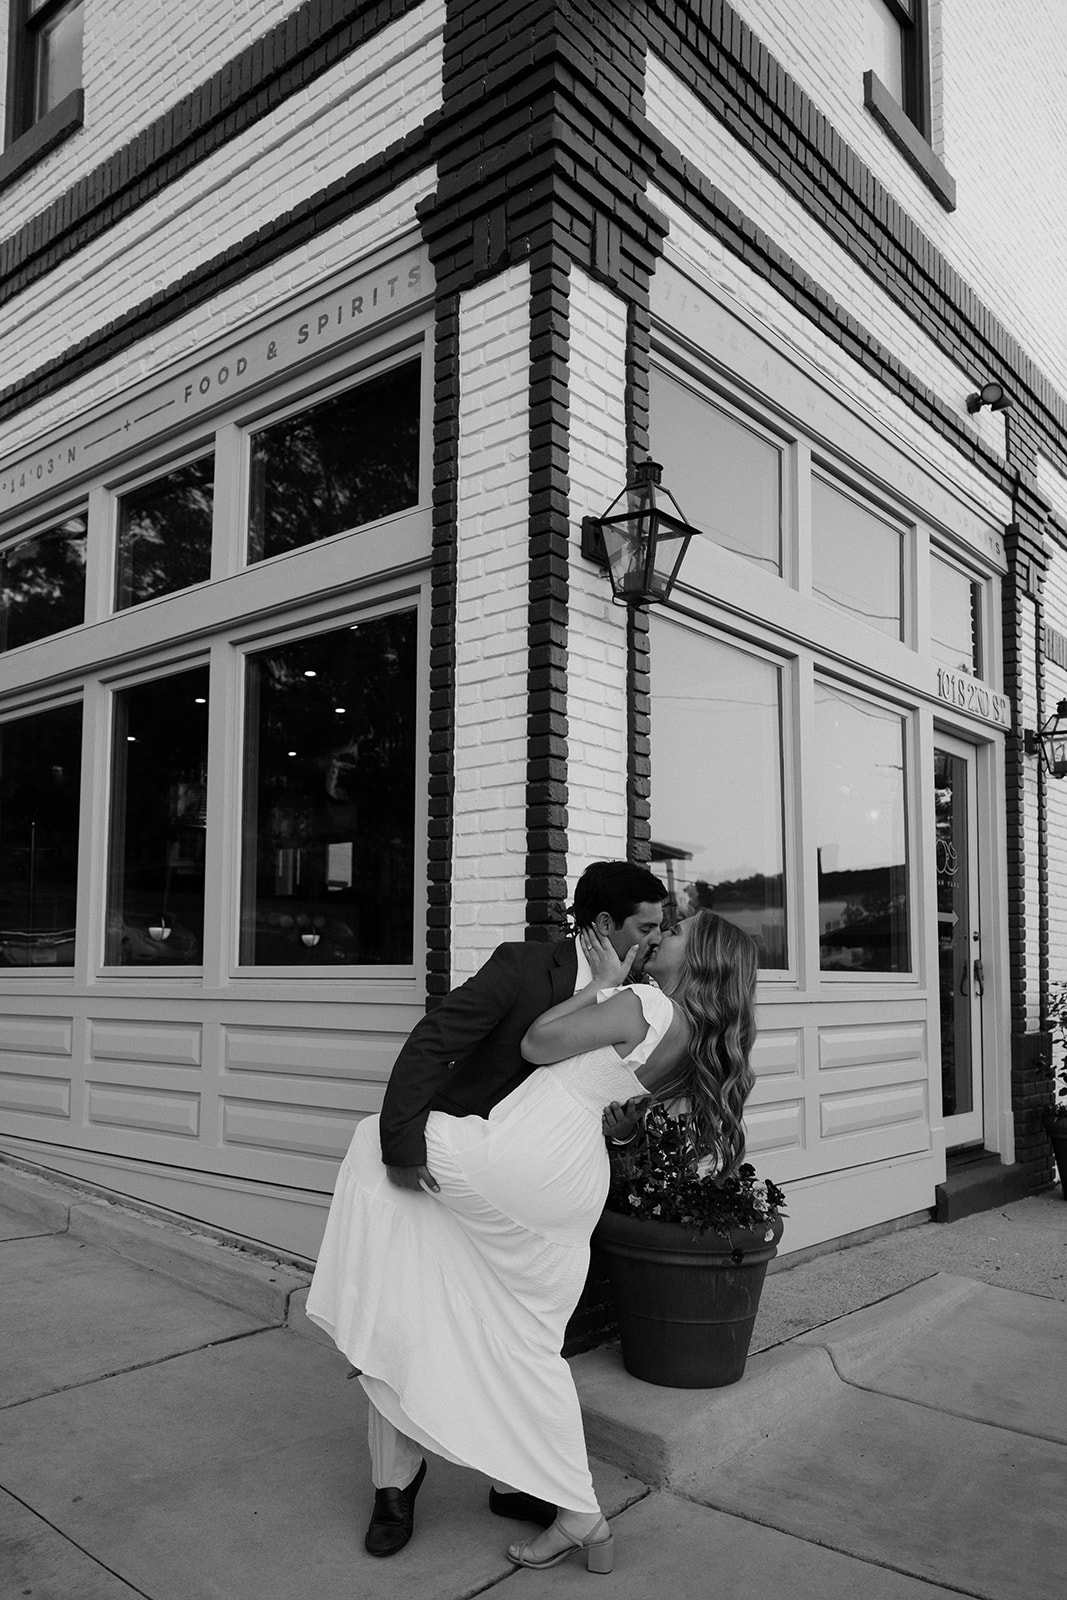 Fun, downtown engagement pictures.